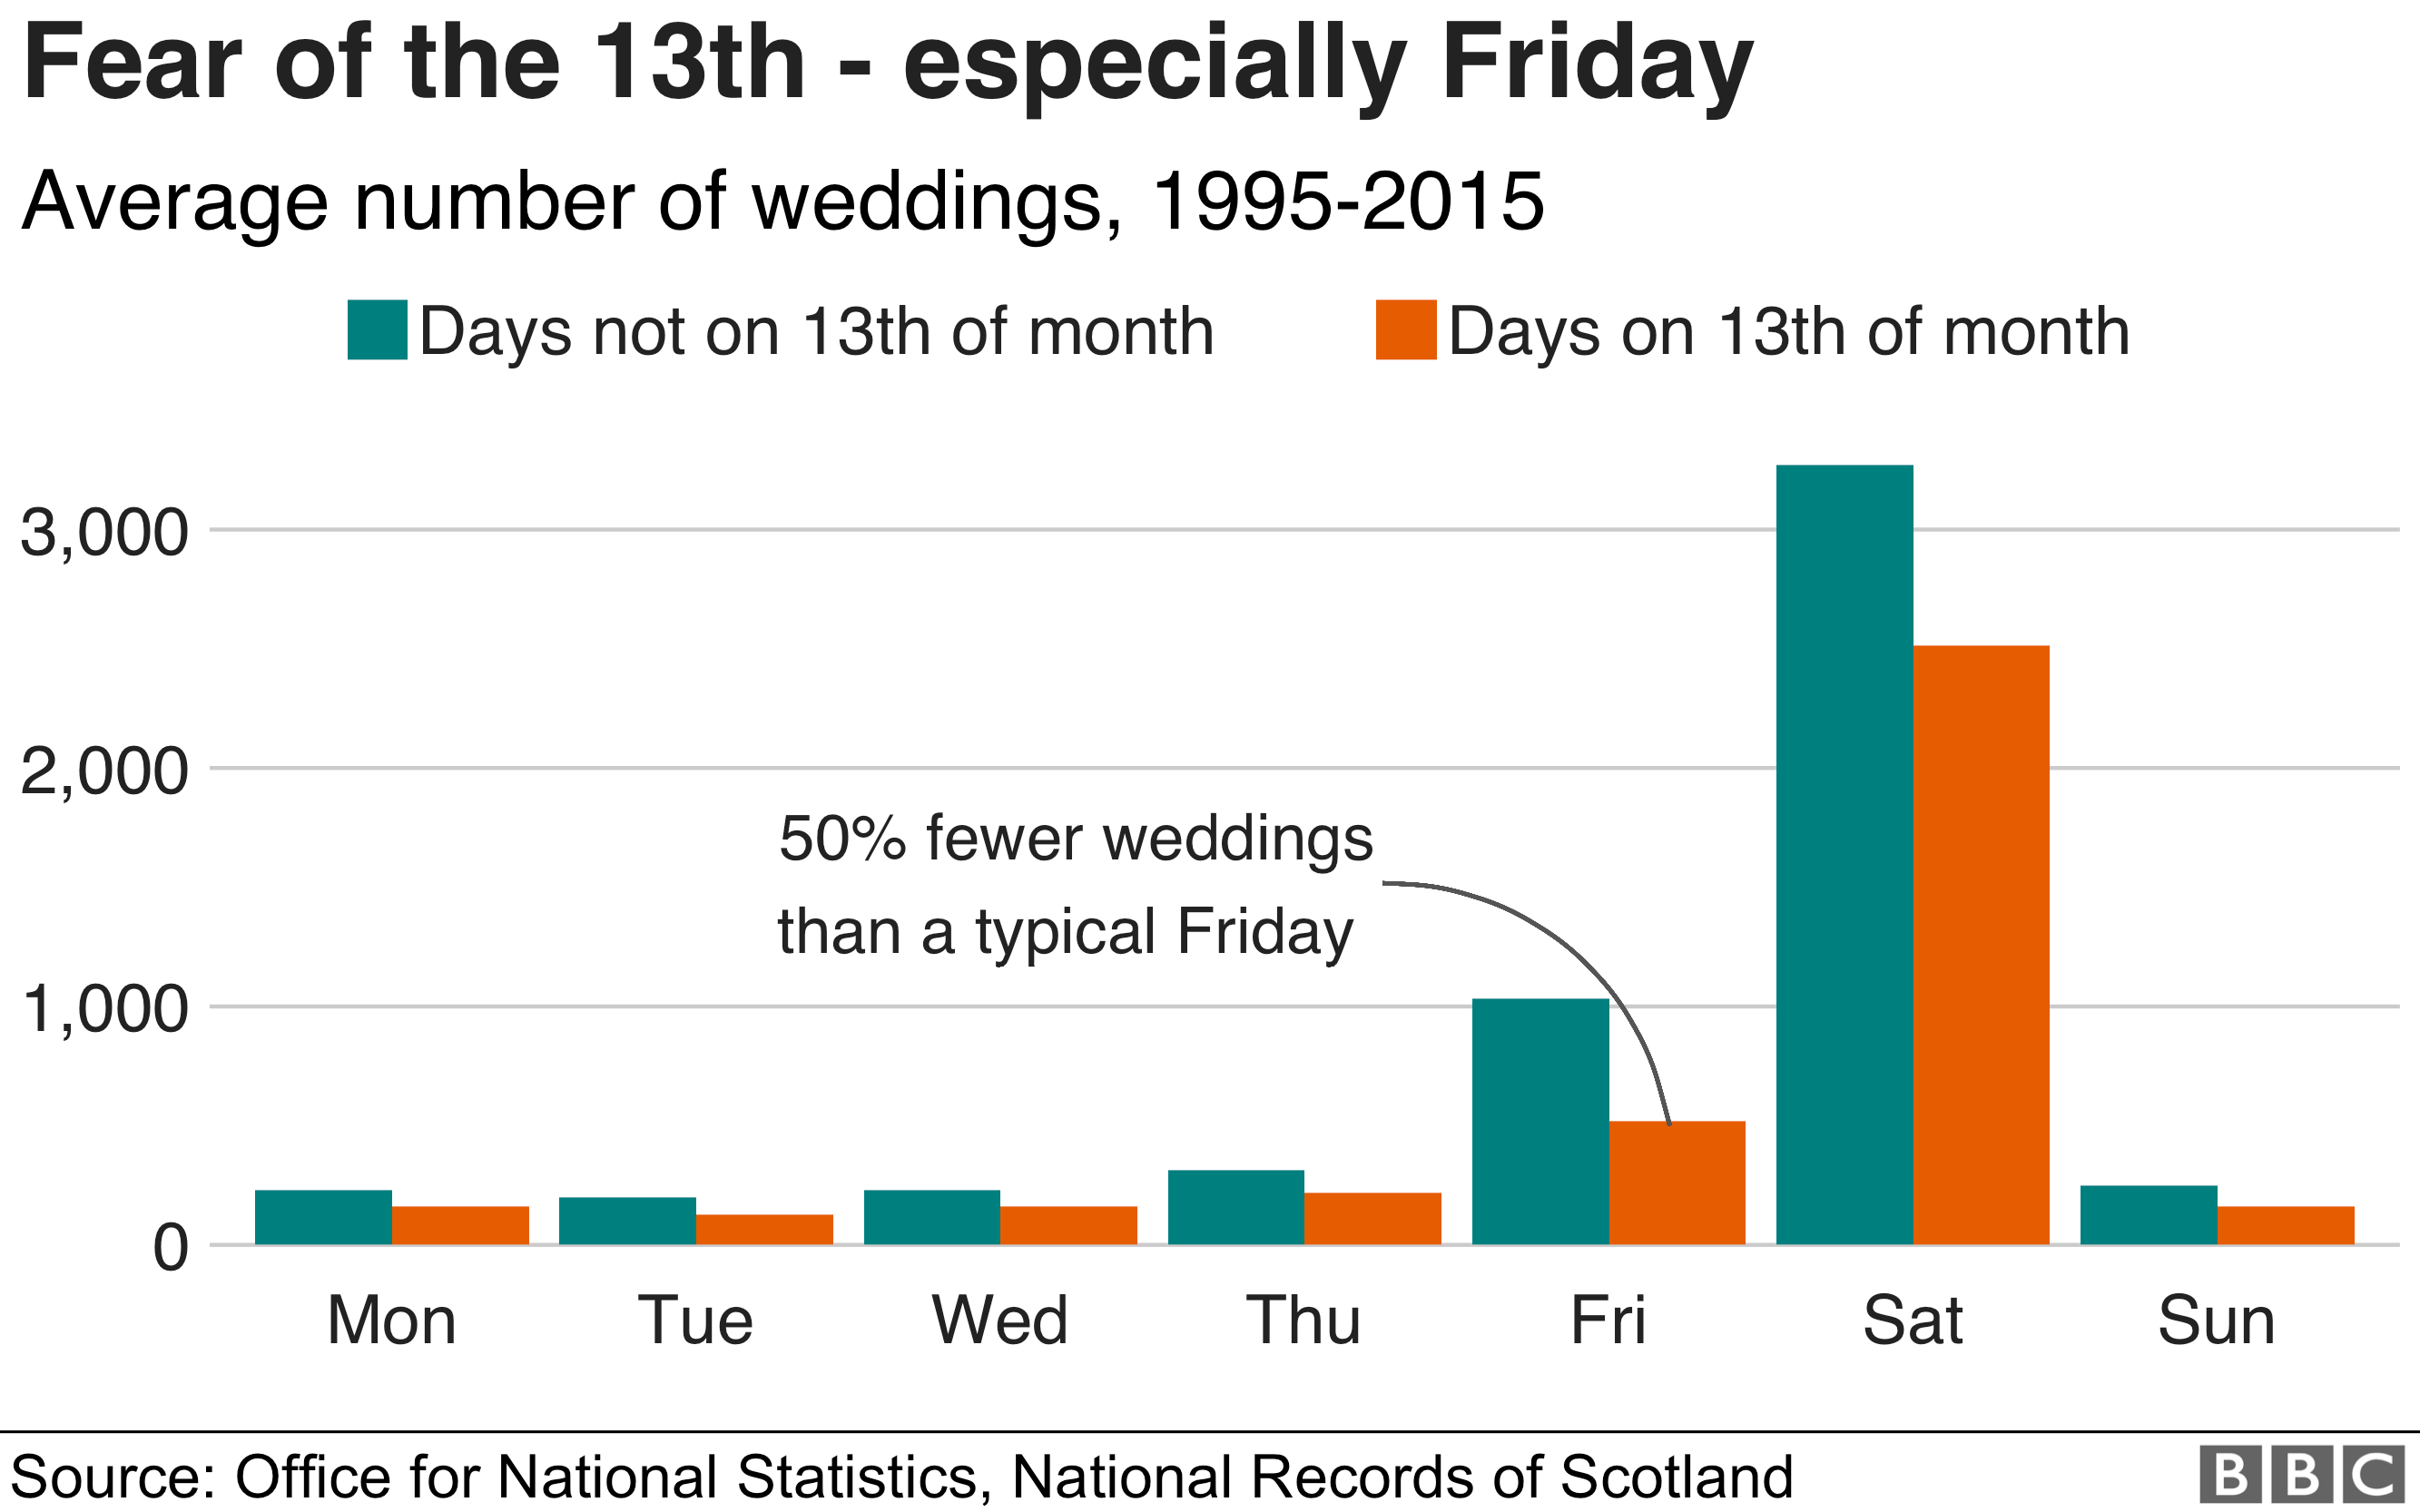 Chart showing how days falling on the 13th of the month are unpopular, but especially Fridays